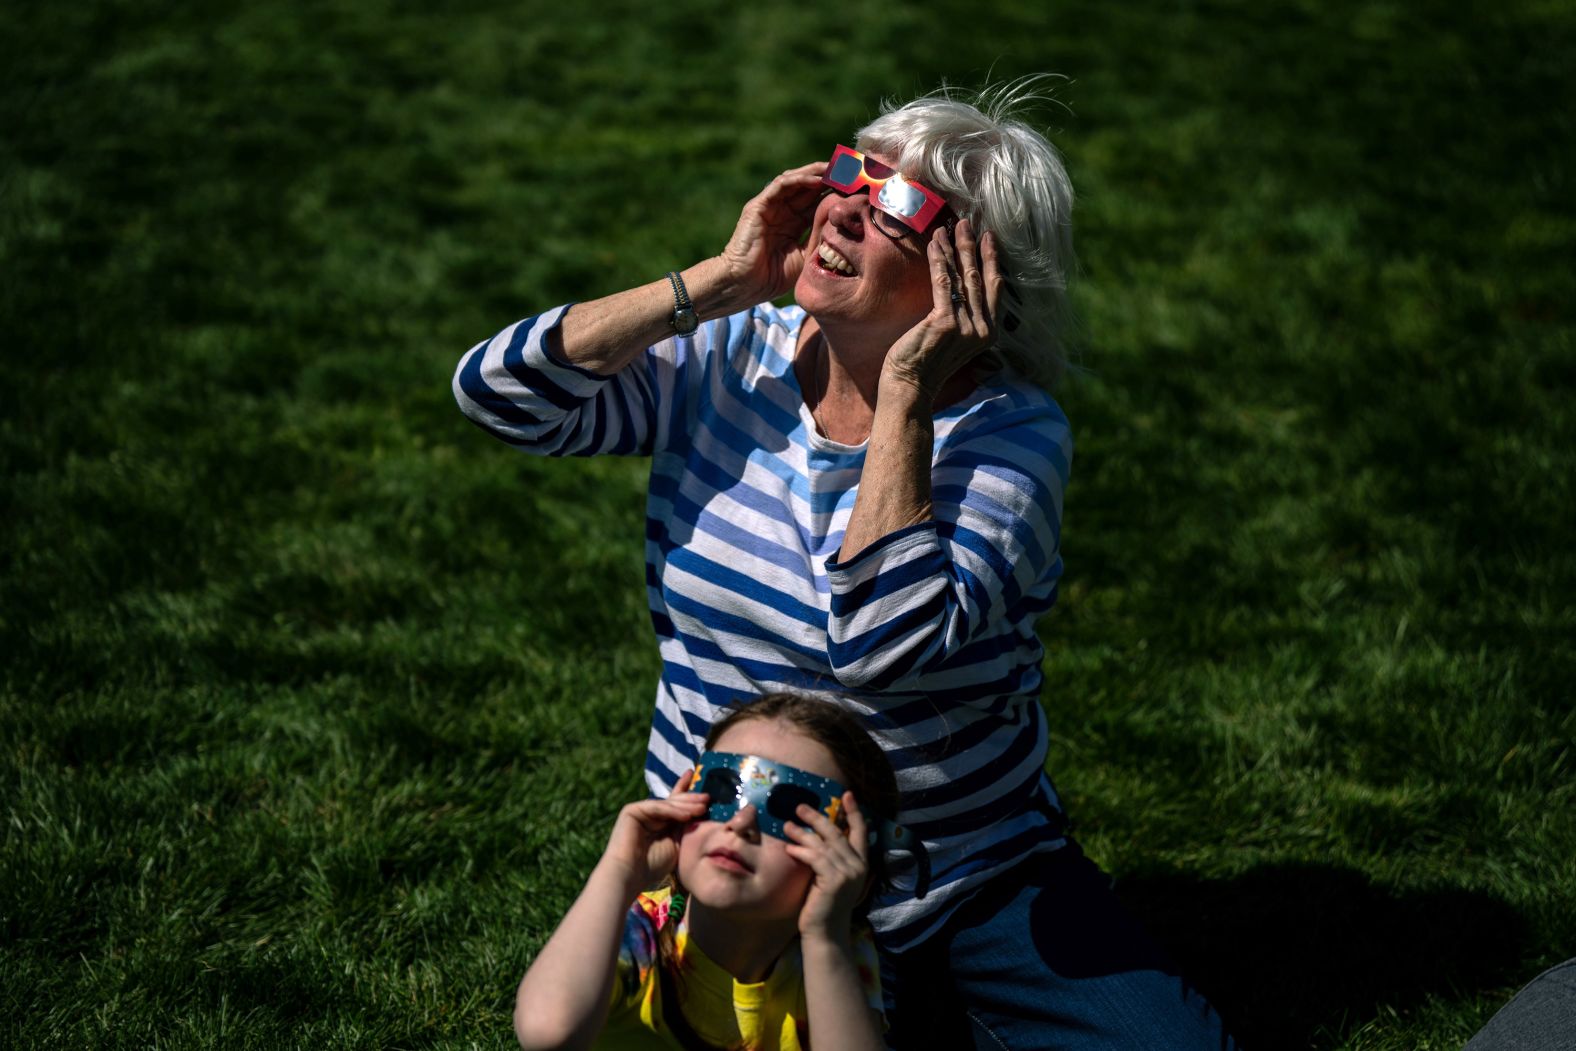 Barbara McLaughlin and her granddaughter test out their eclipse glasses as they wait on the National Mall in Washington, DC.